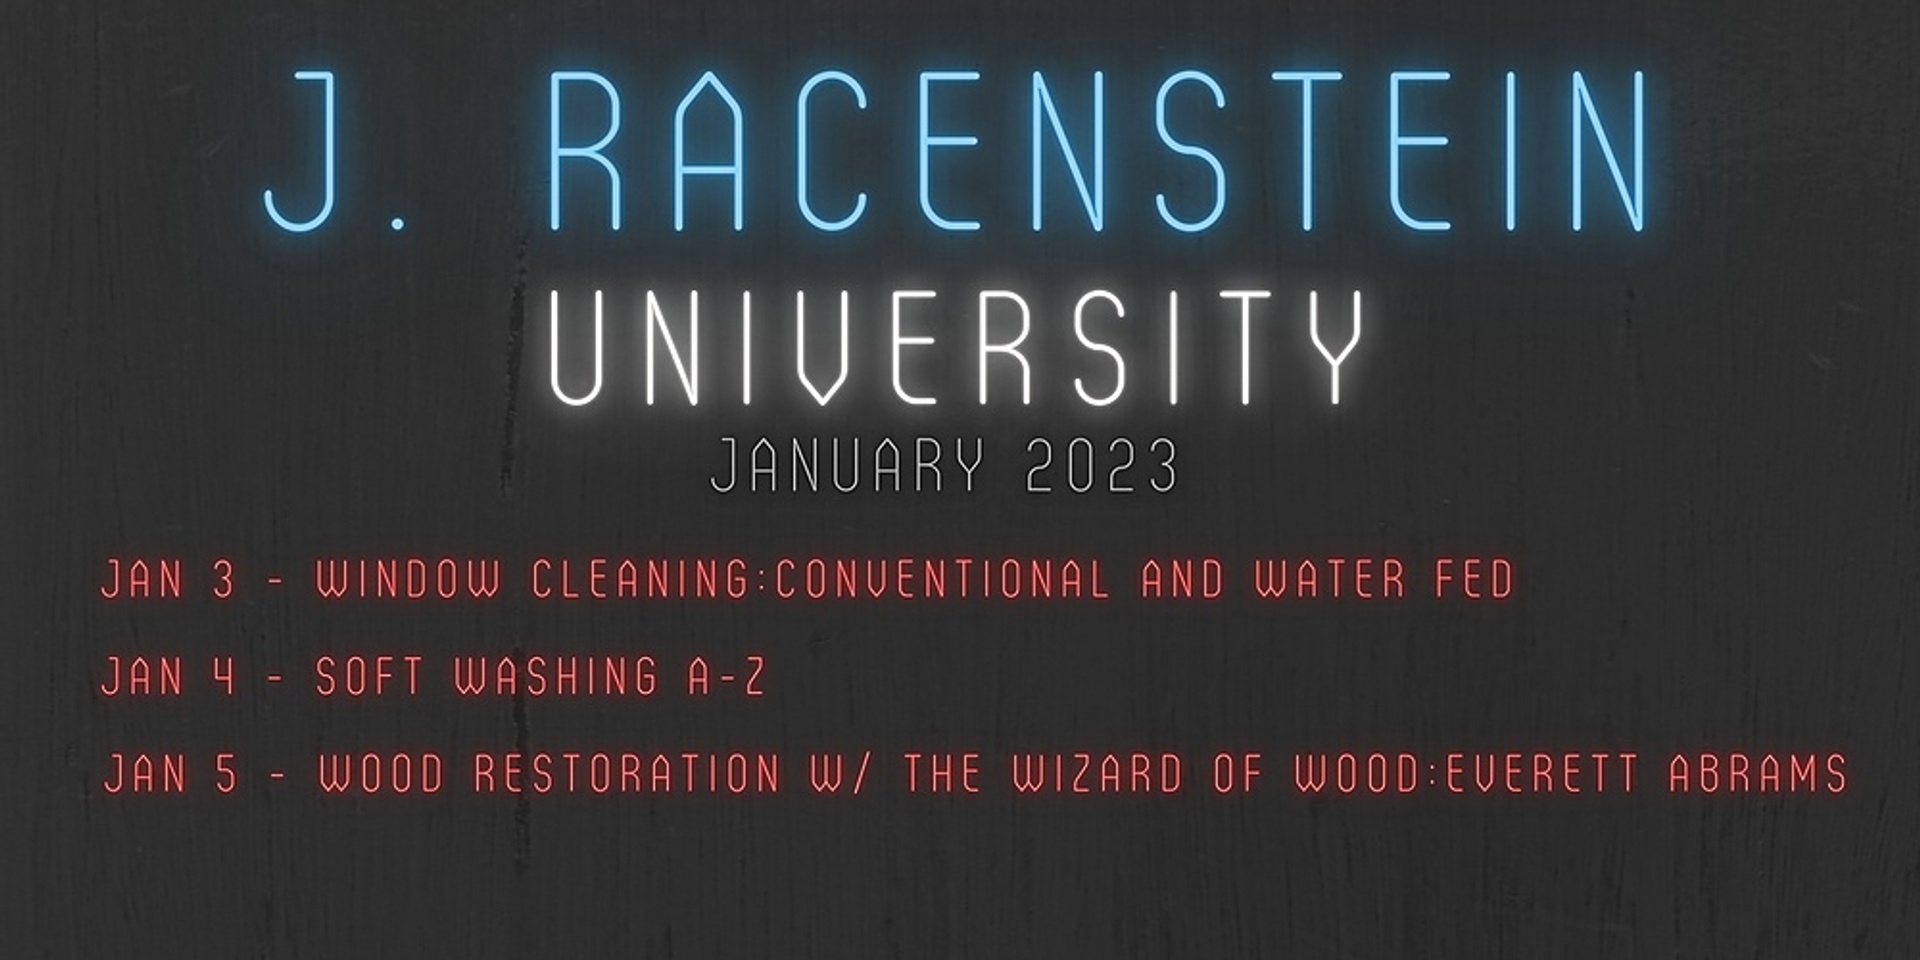 January 3rd-5th: Window Cleaning & Water Fed, Softwashing, Wood Restoration